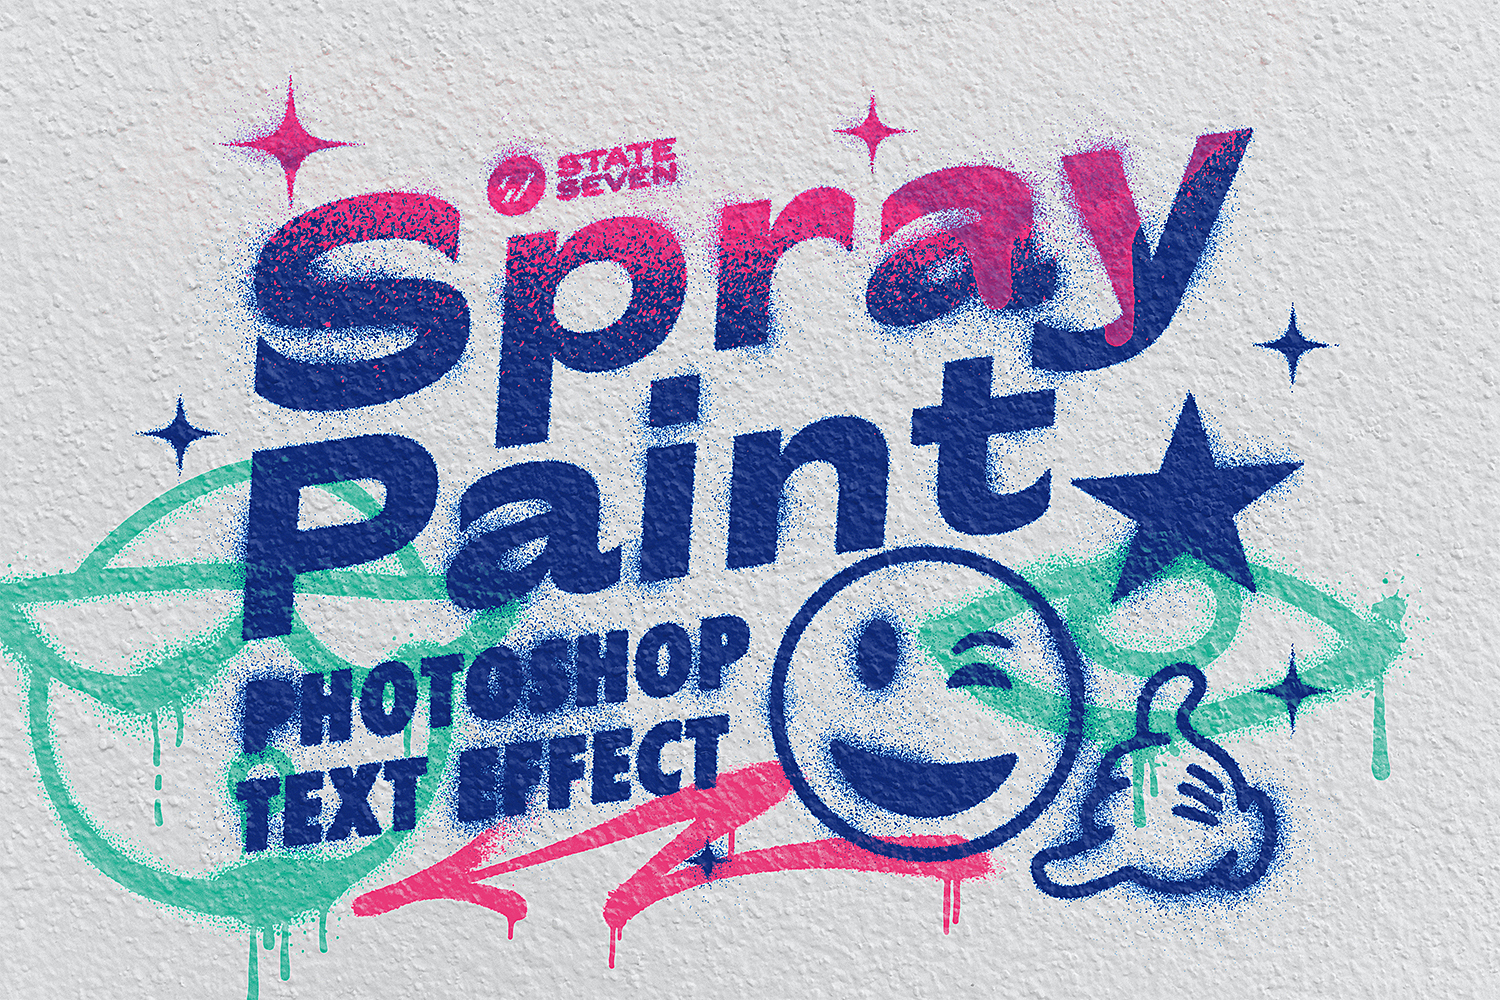 Spray Paint Photoshop Action, Add-ons